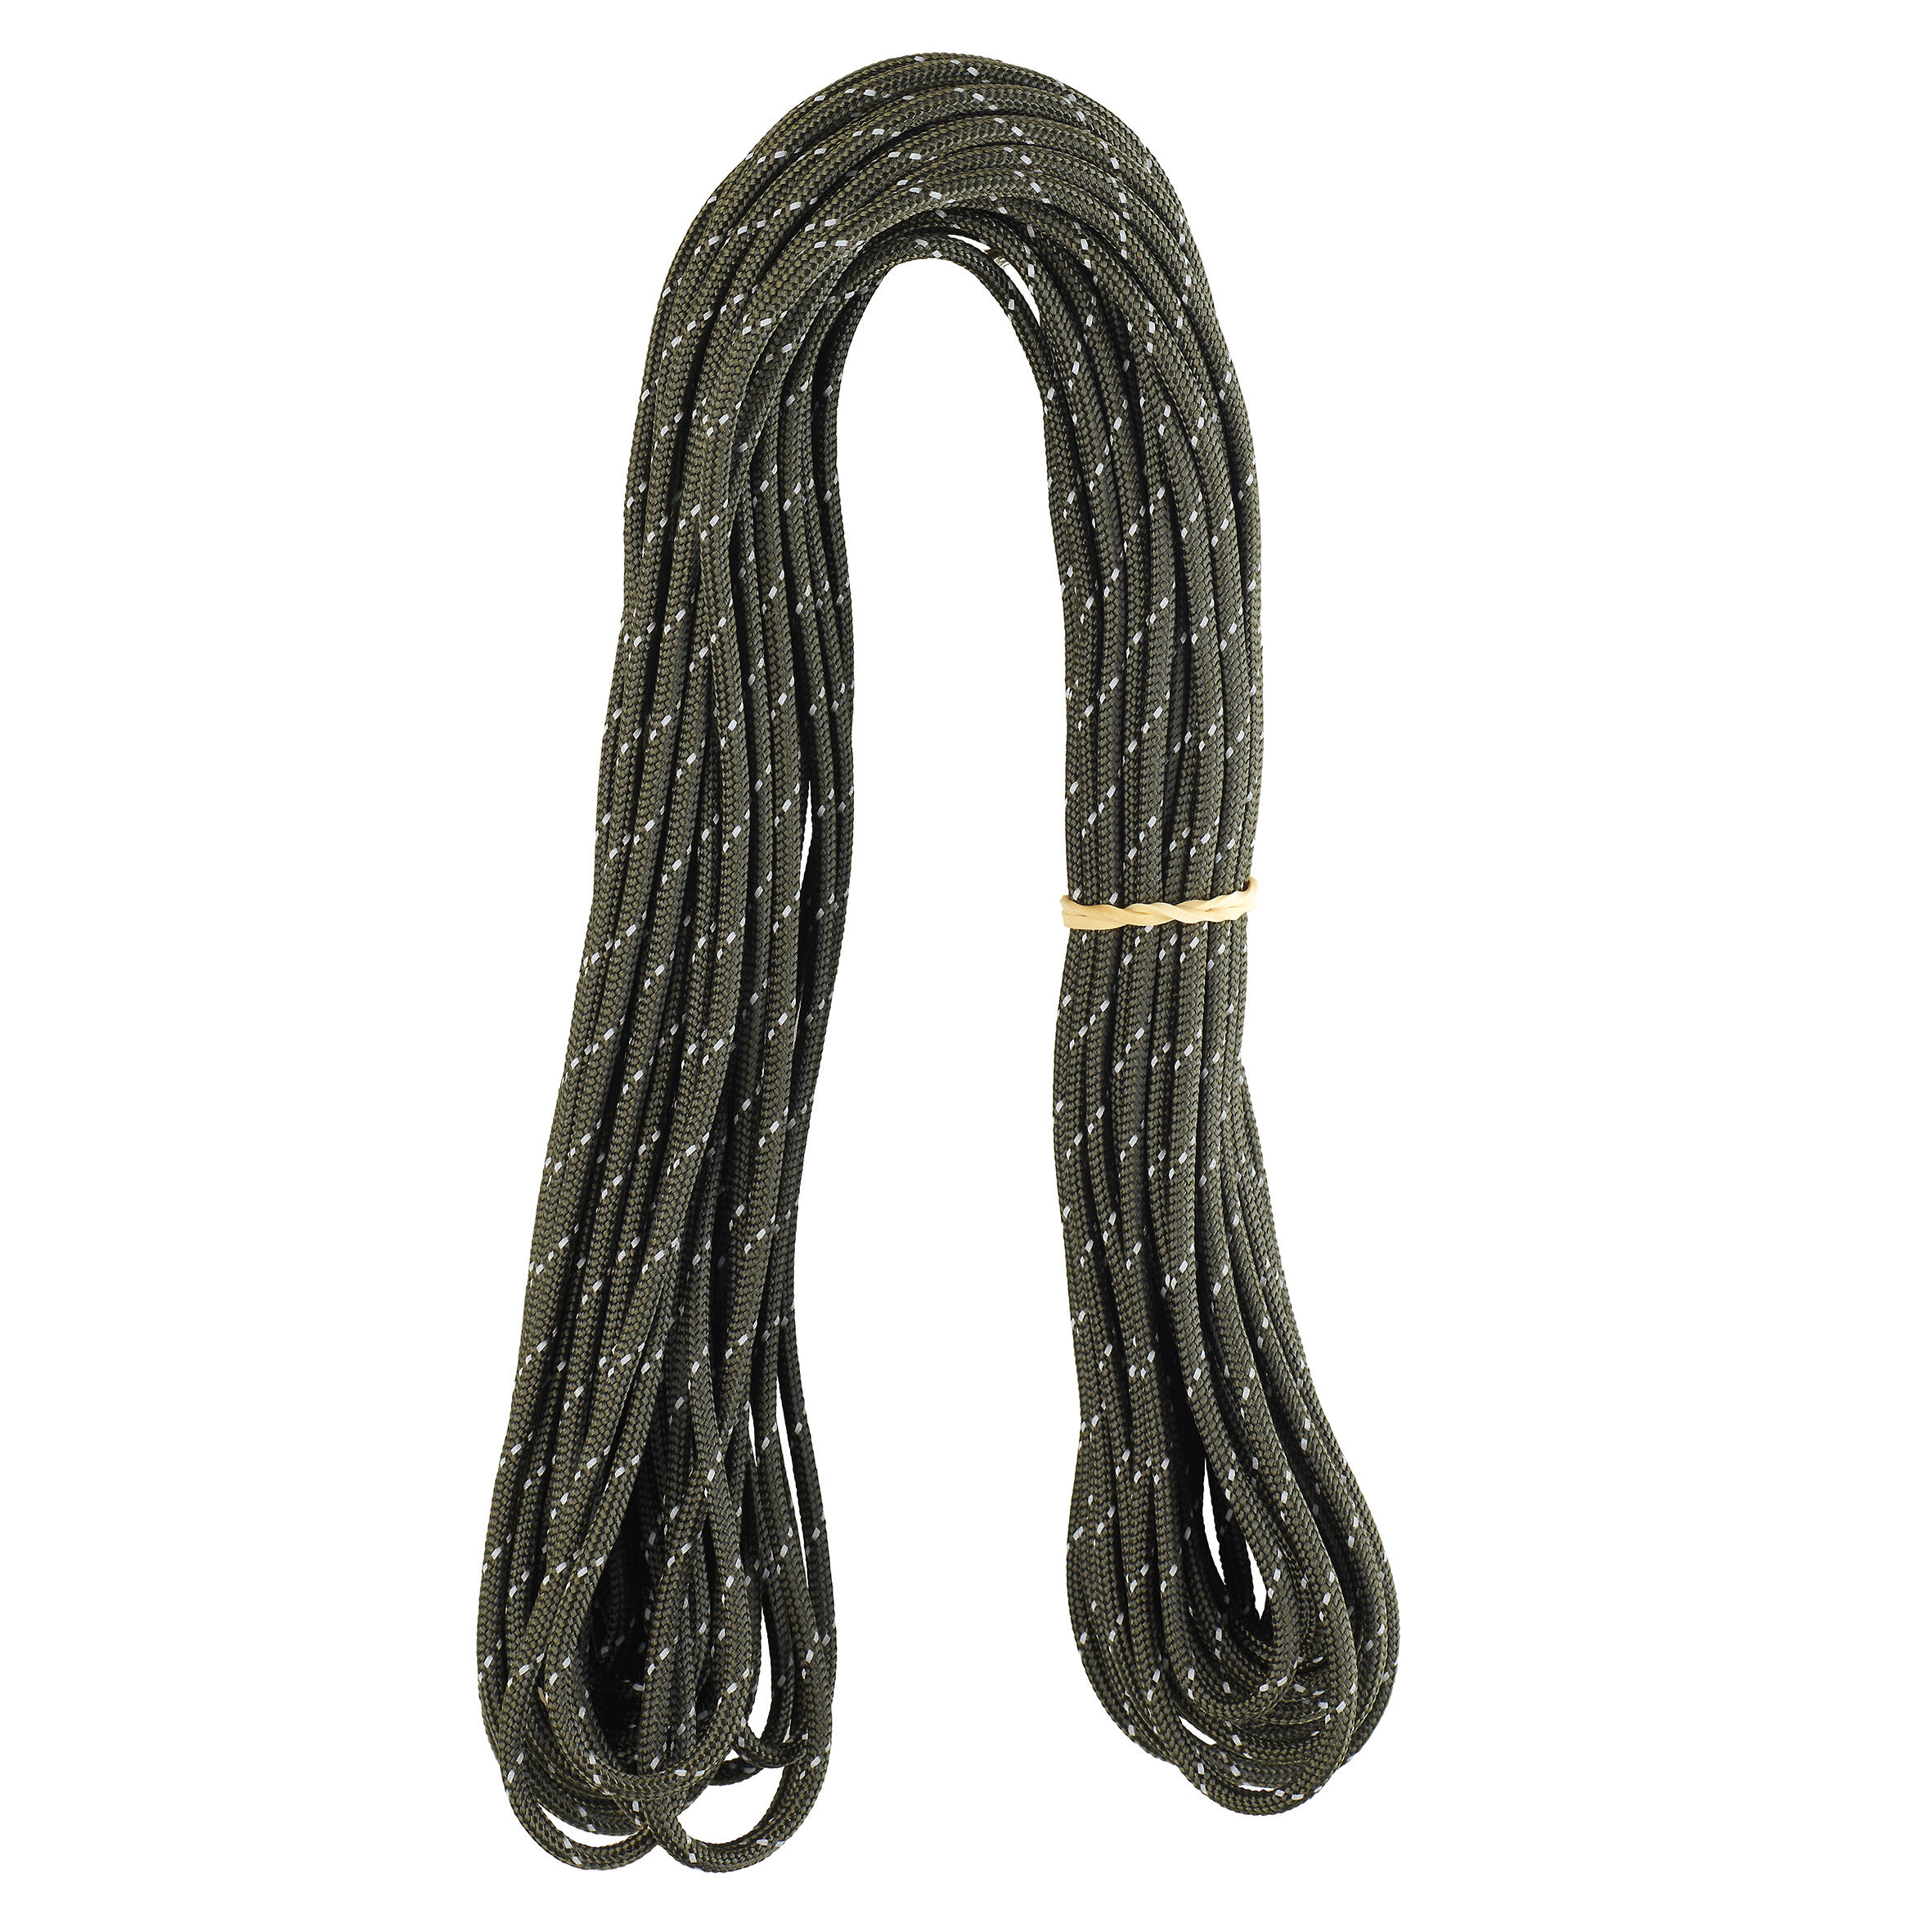 Paracord Bushcraft Firecord 550 20 metres 3/3